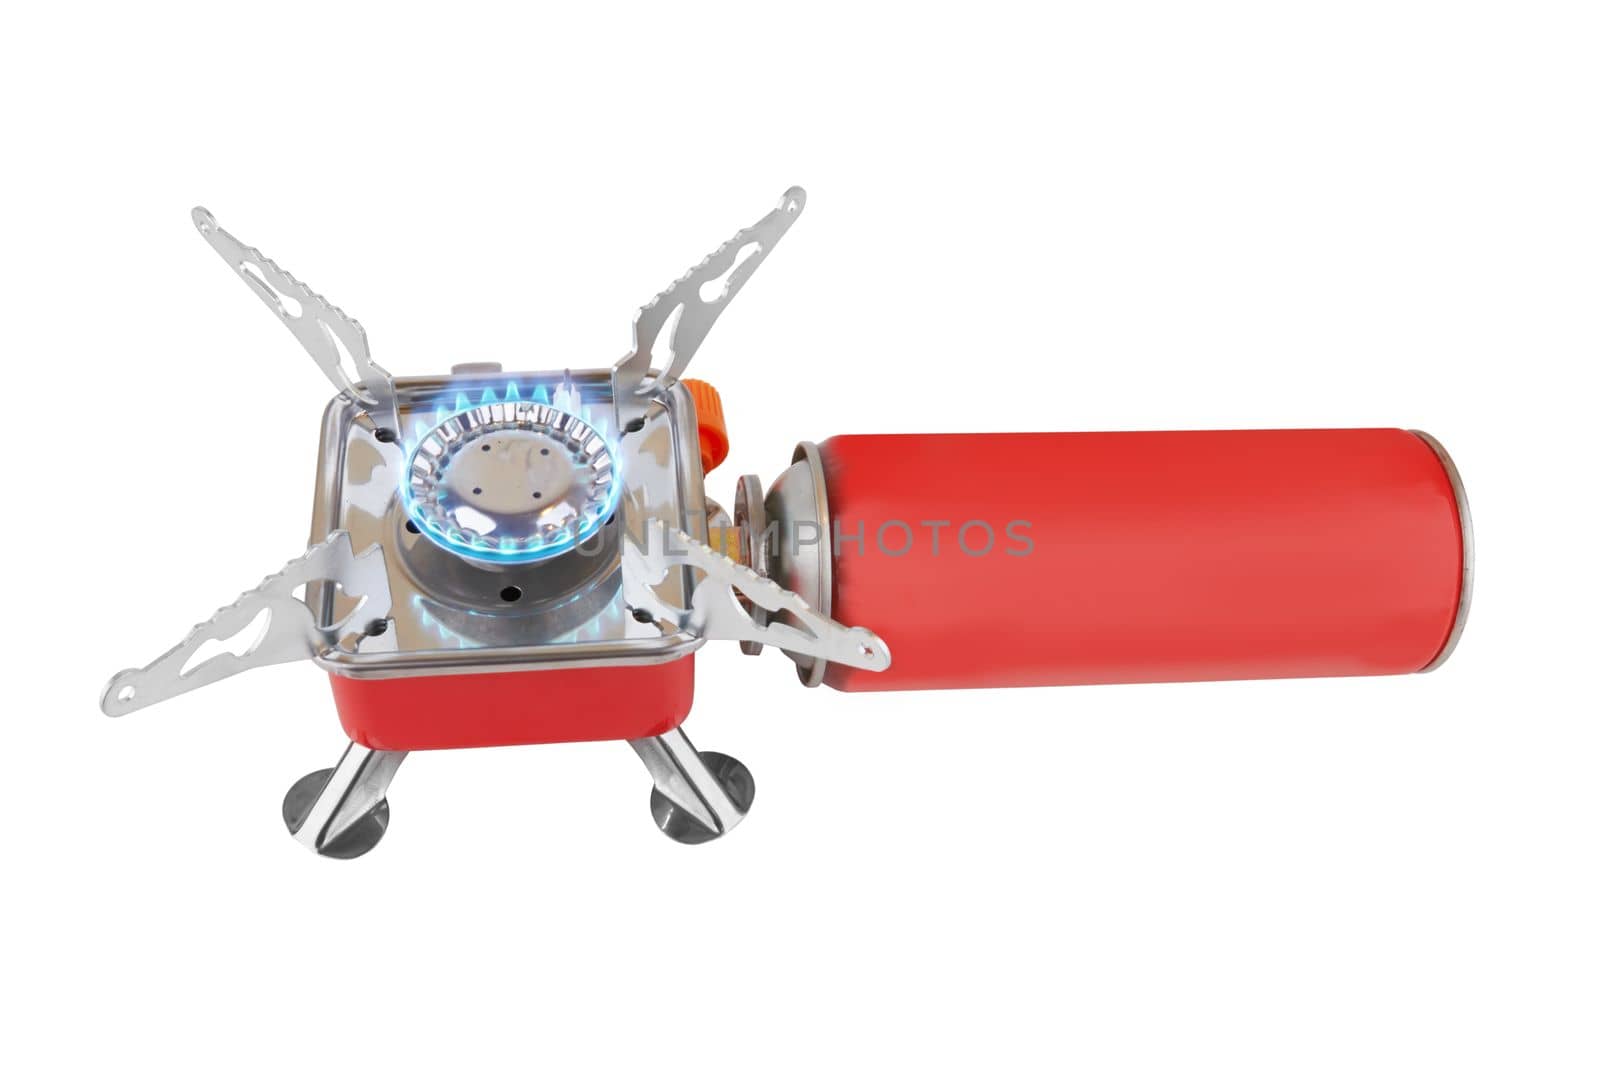 Camping gas stove isolated on a white background